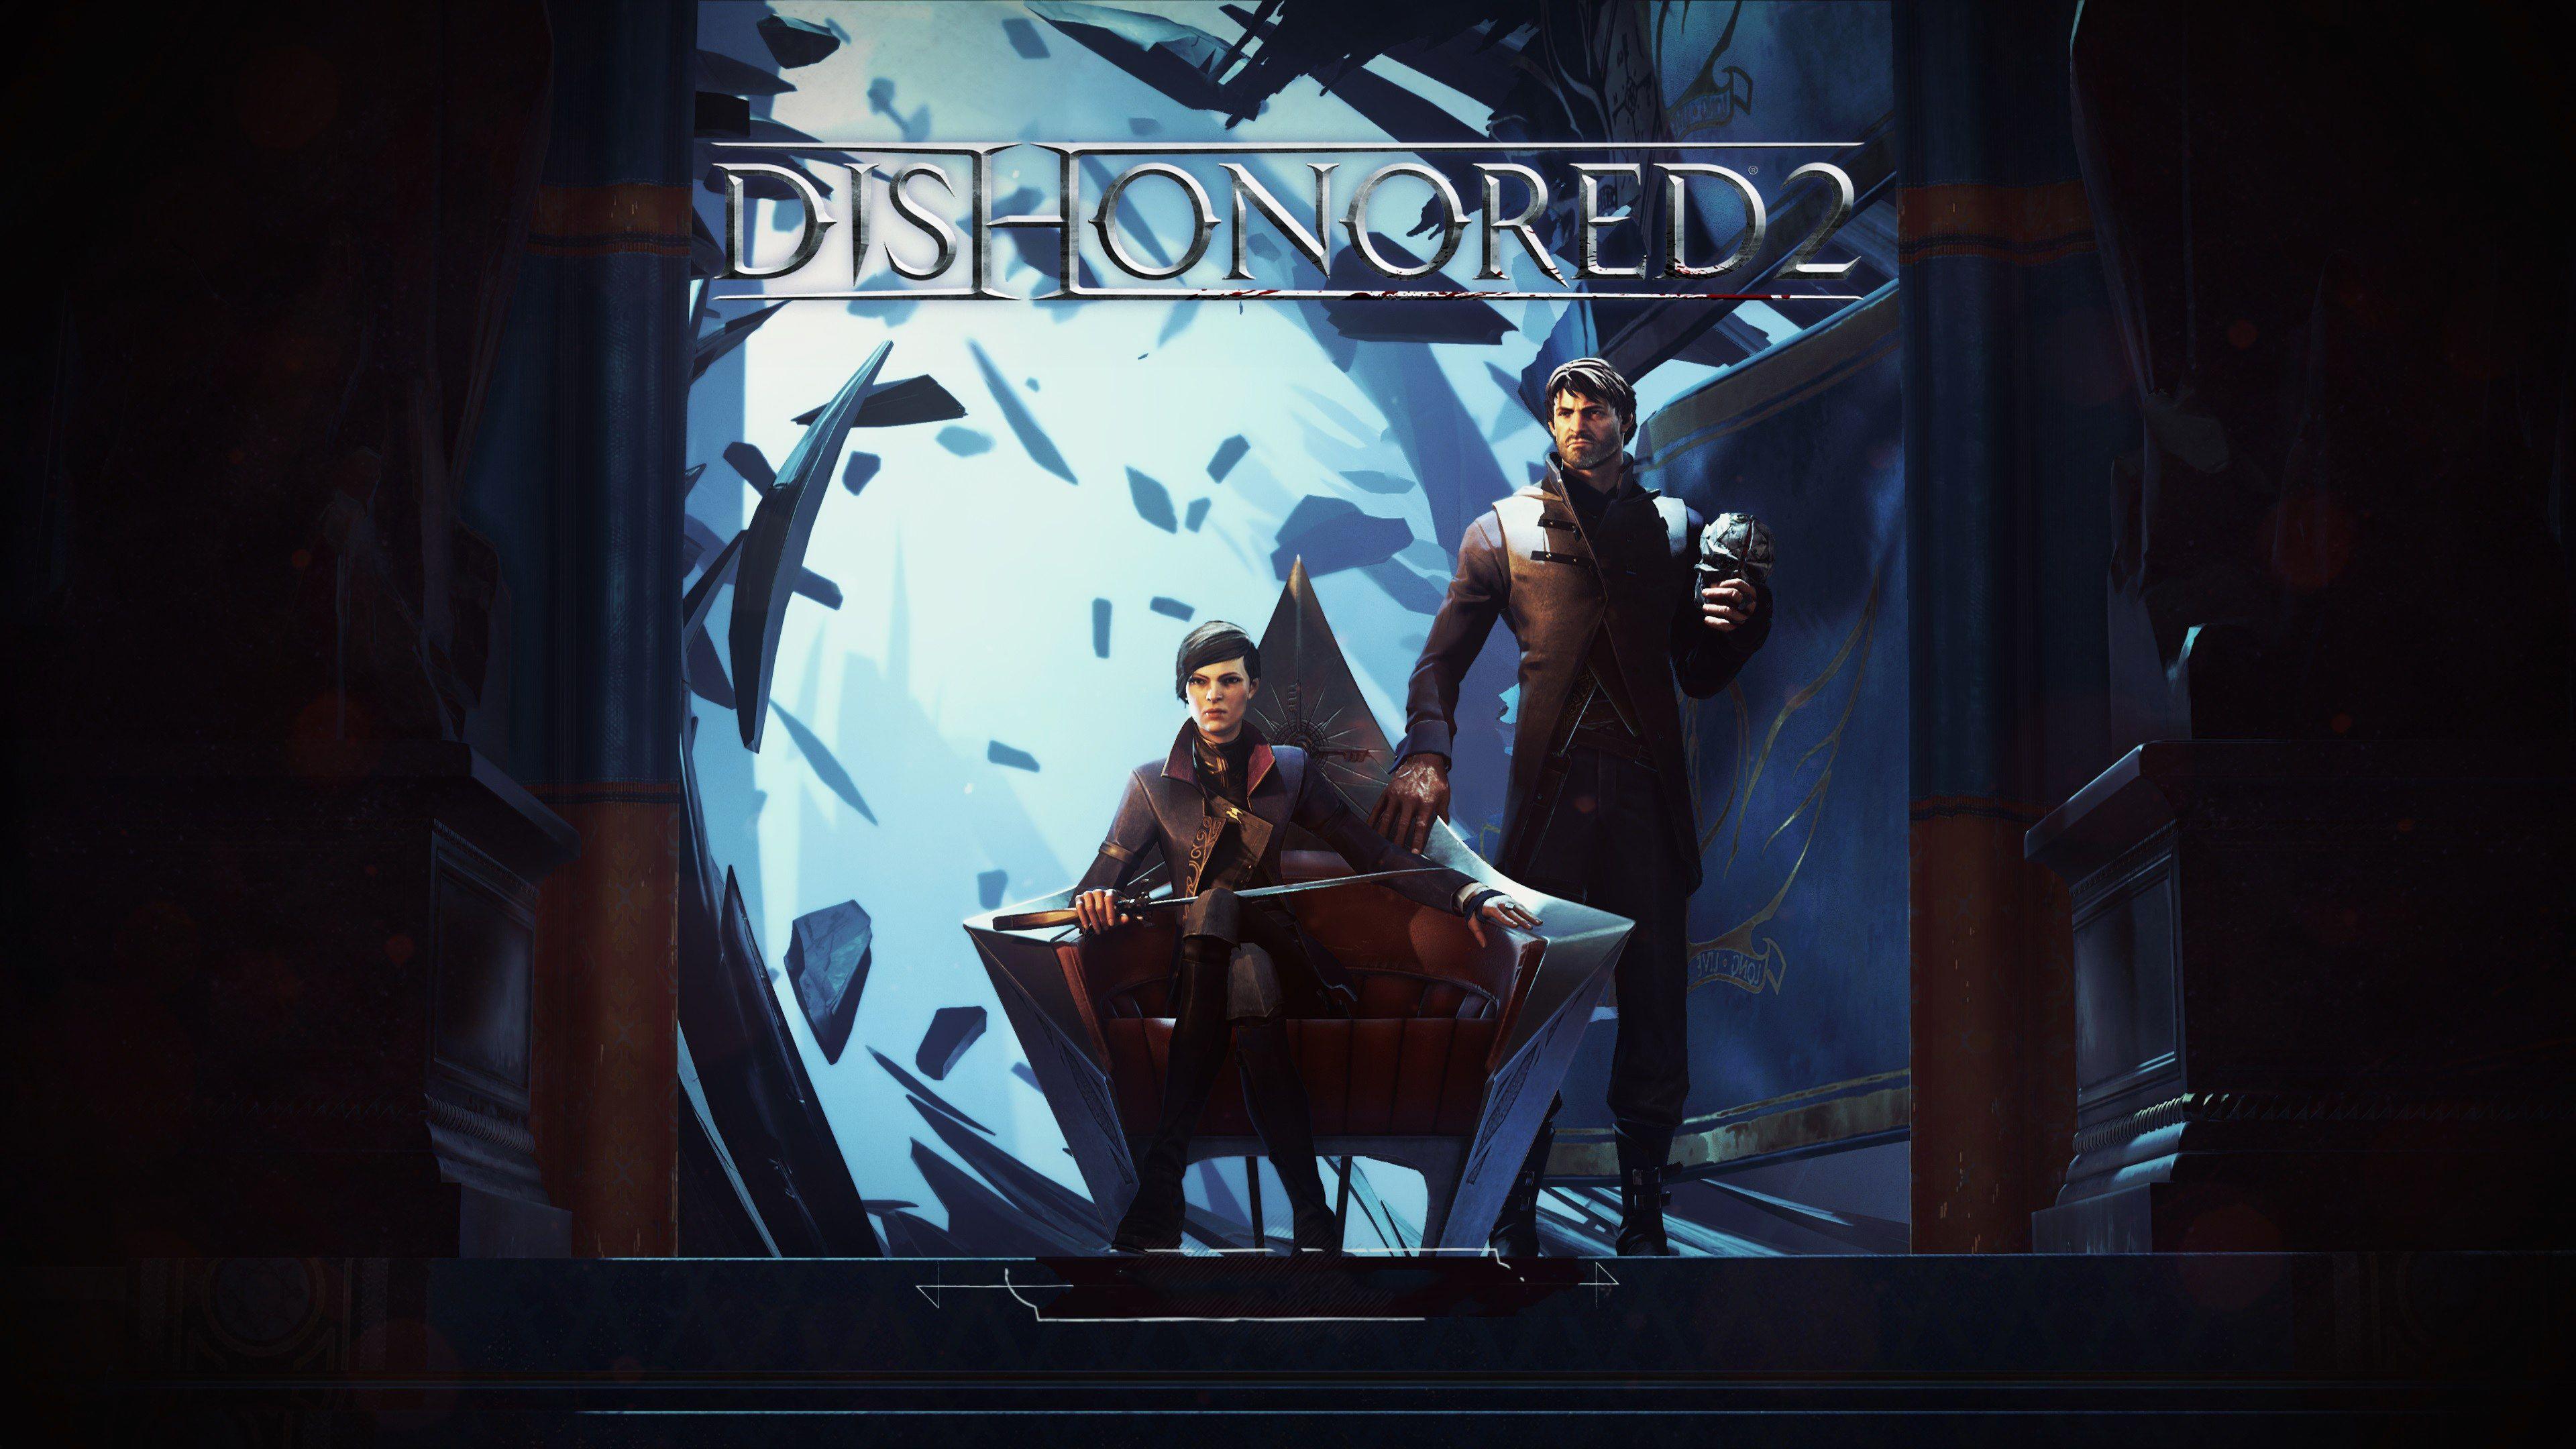 4K dishonored 2 wallpapers Wallpapers  4k Wallpapers  40000 ipad  wallpapers 4k  4k wallpaper Pc